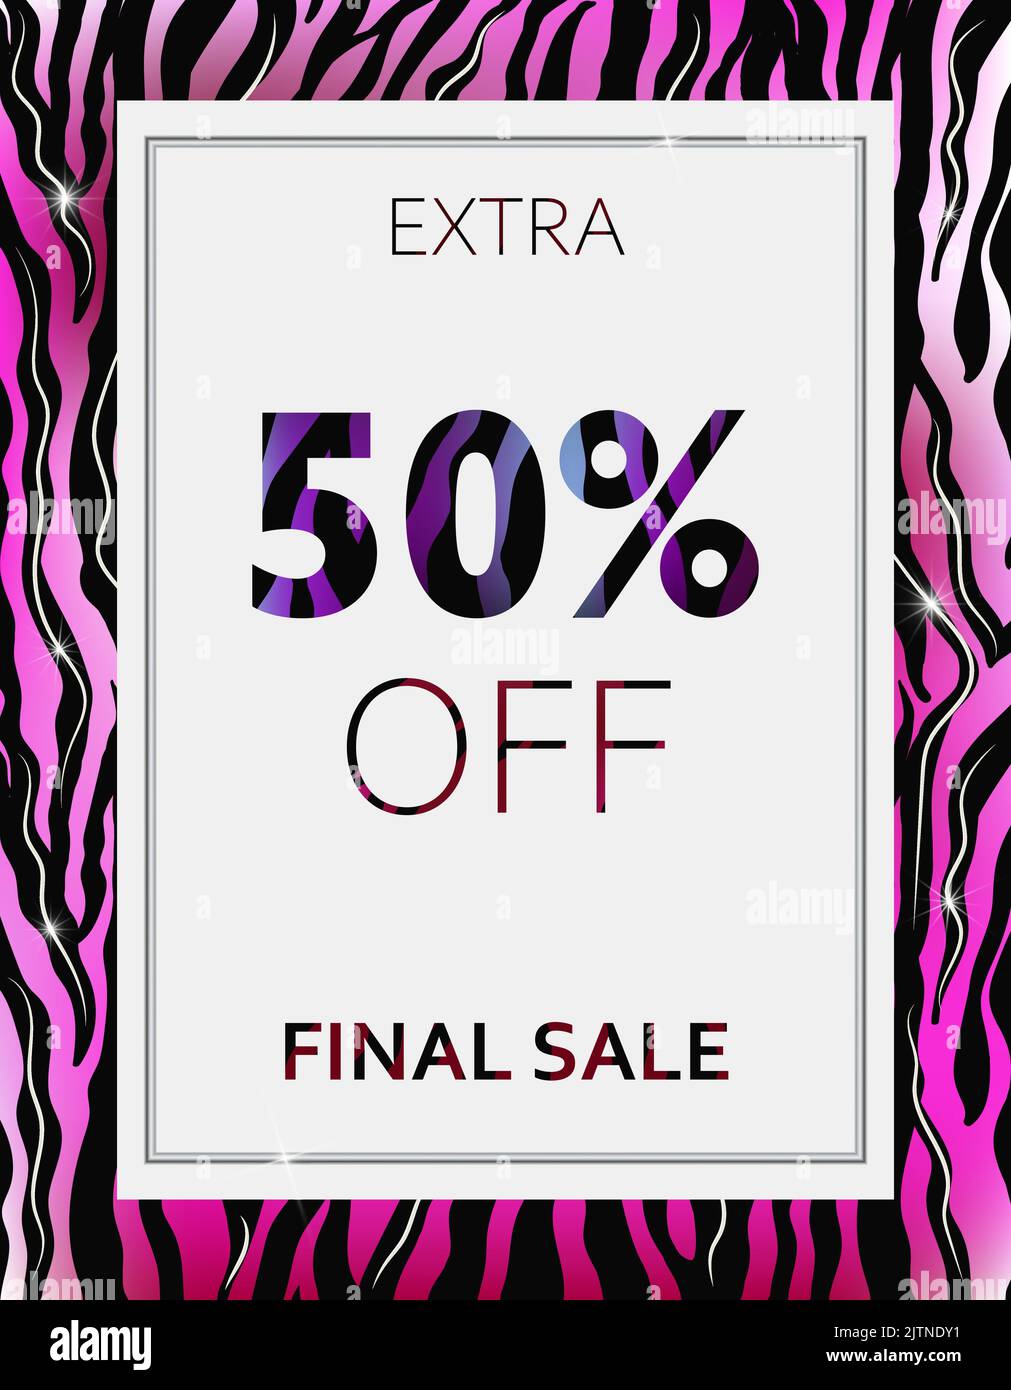 Final Sale Banner 50 percent OFF. Offer Ad.  Stock Vector